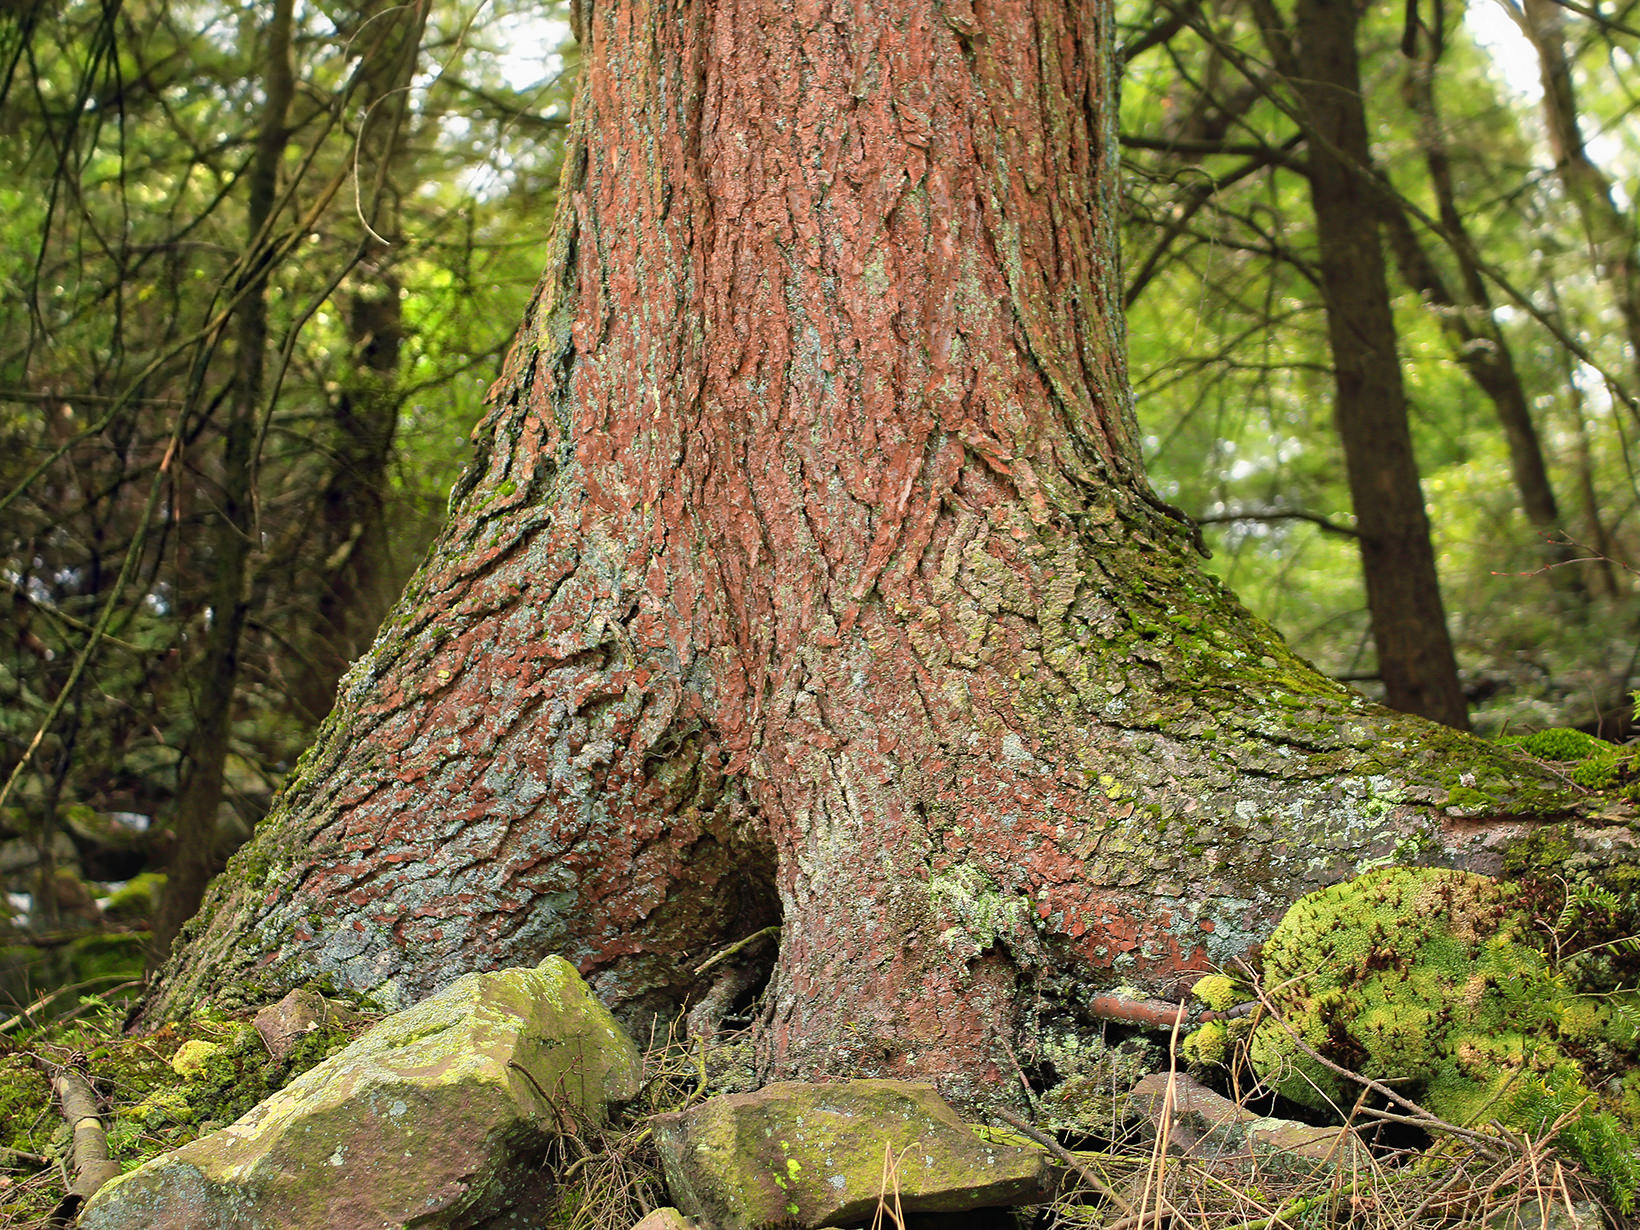 A hemlock tree trunk emerges from a forest floor.